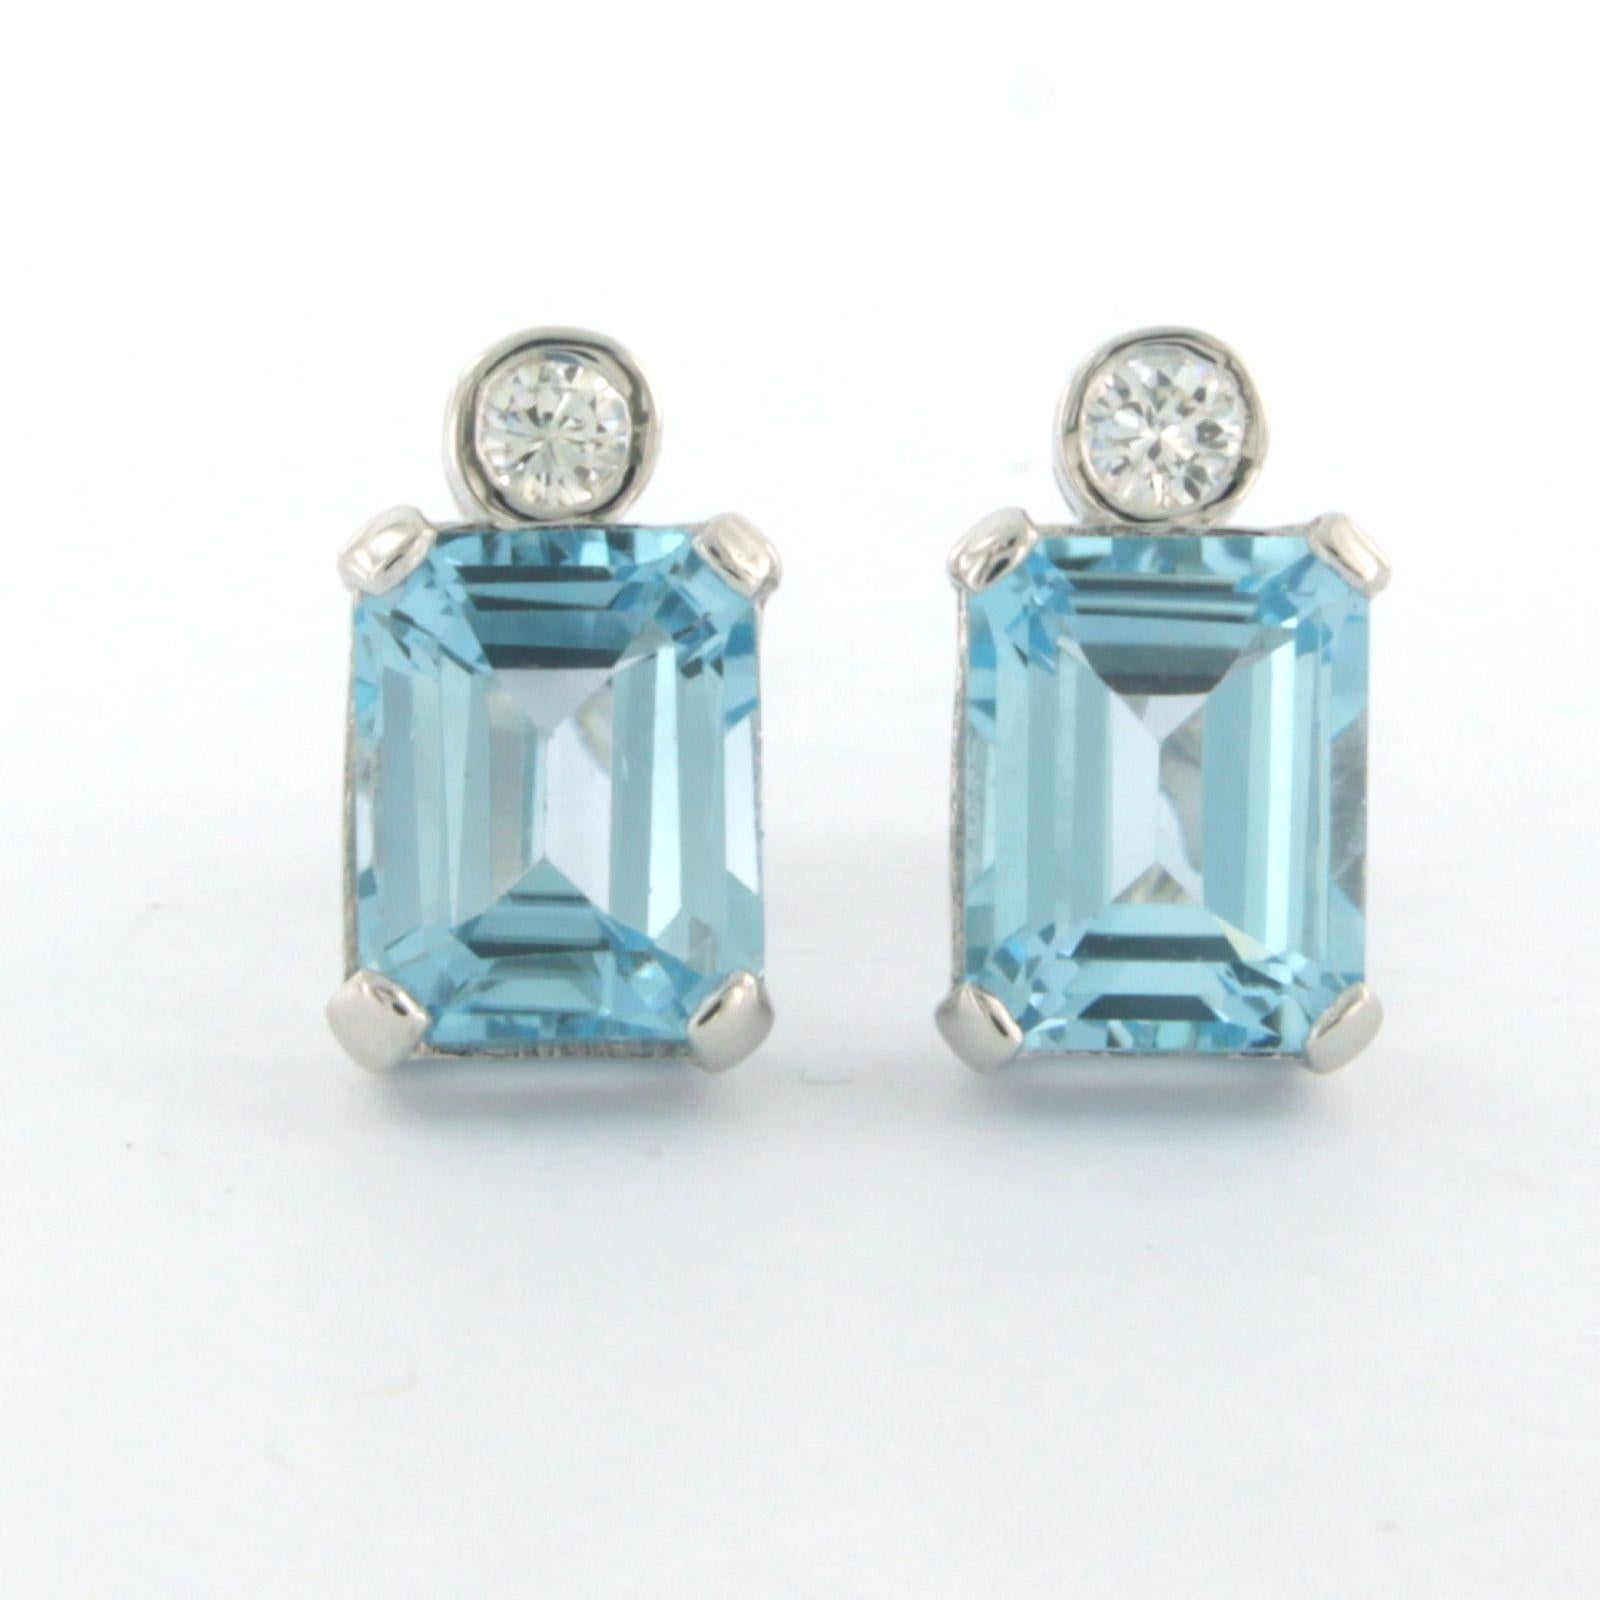 14k white gold ear studs set with topaz and brilliant cut diamond up to 0.20ct - F/G – VS/SI

Detailed description:

the size of the ear stud is 1.3 cm long by 8.0 mm wide

Total weight 3.8 grams

set with

- 2 x 9.4 x 7.4 mm emerald cut facet cut